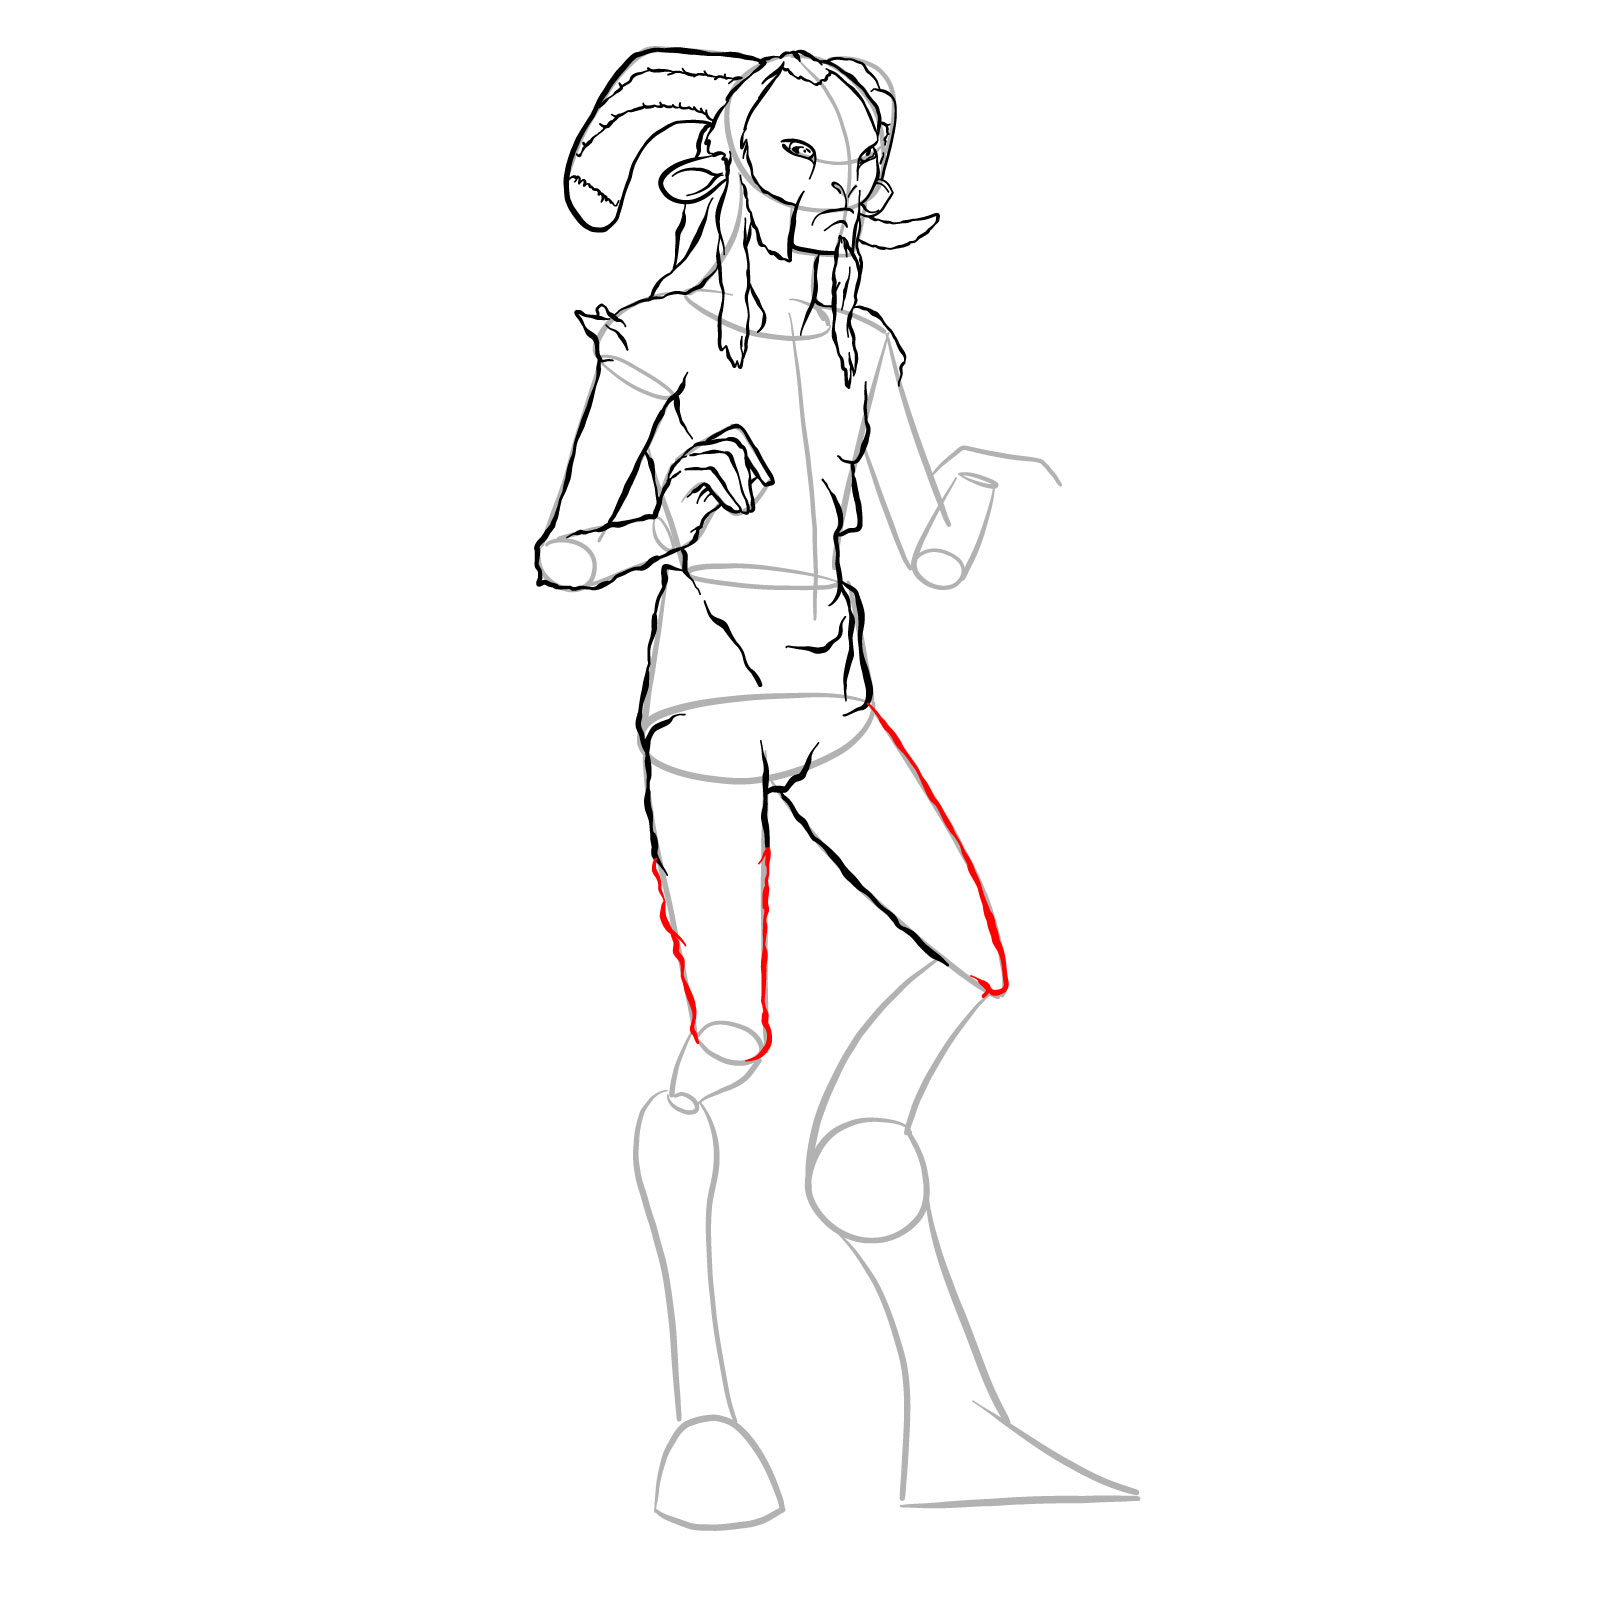 How to draw a Faun - step 23